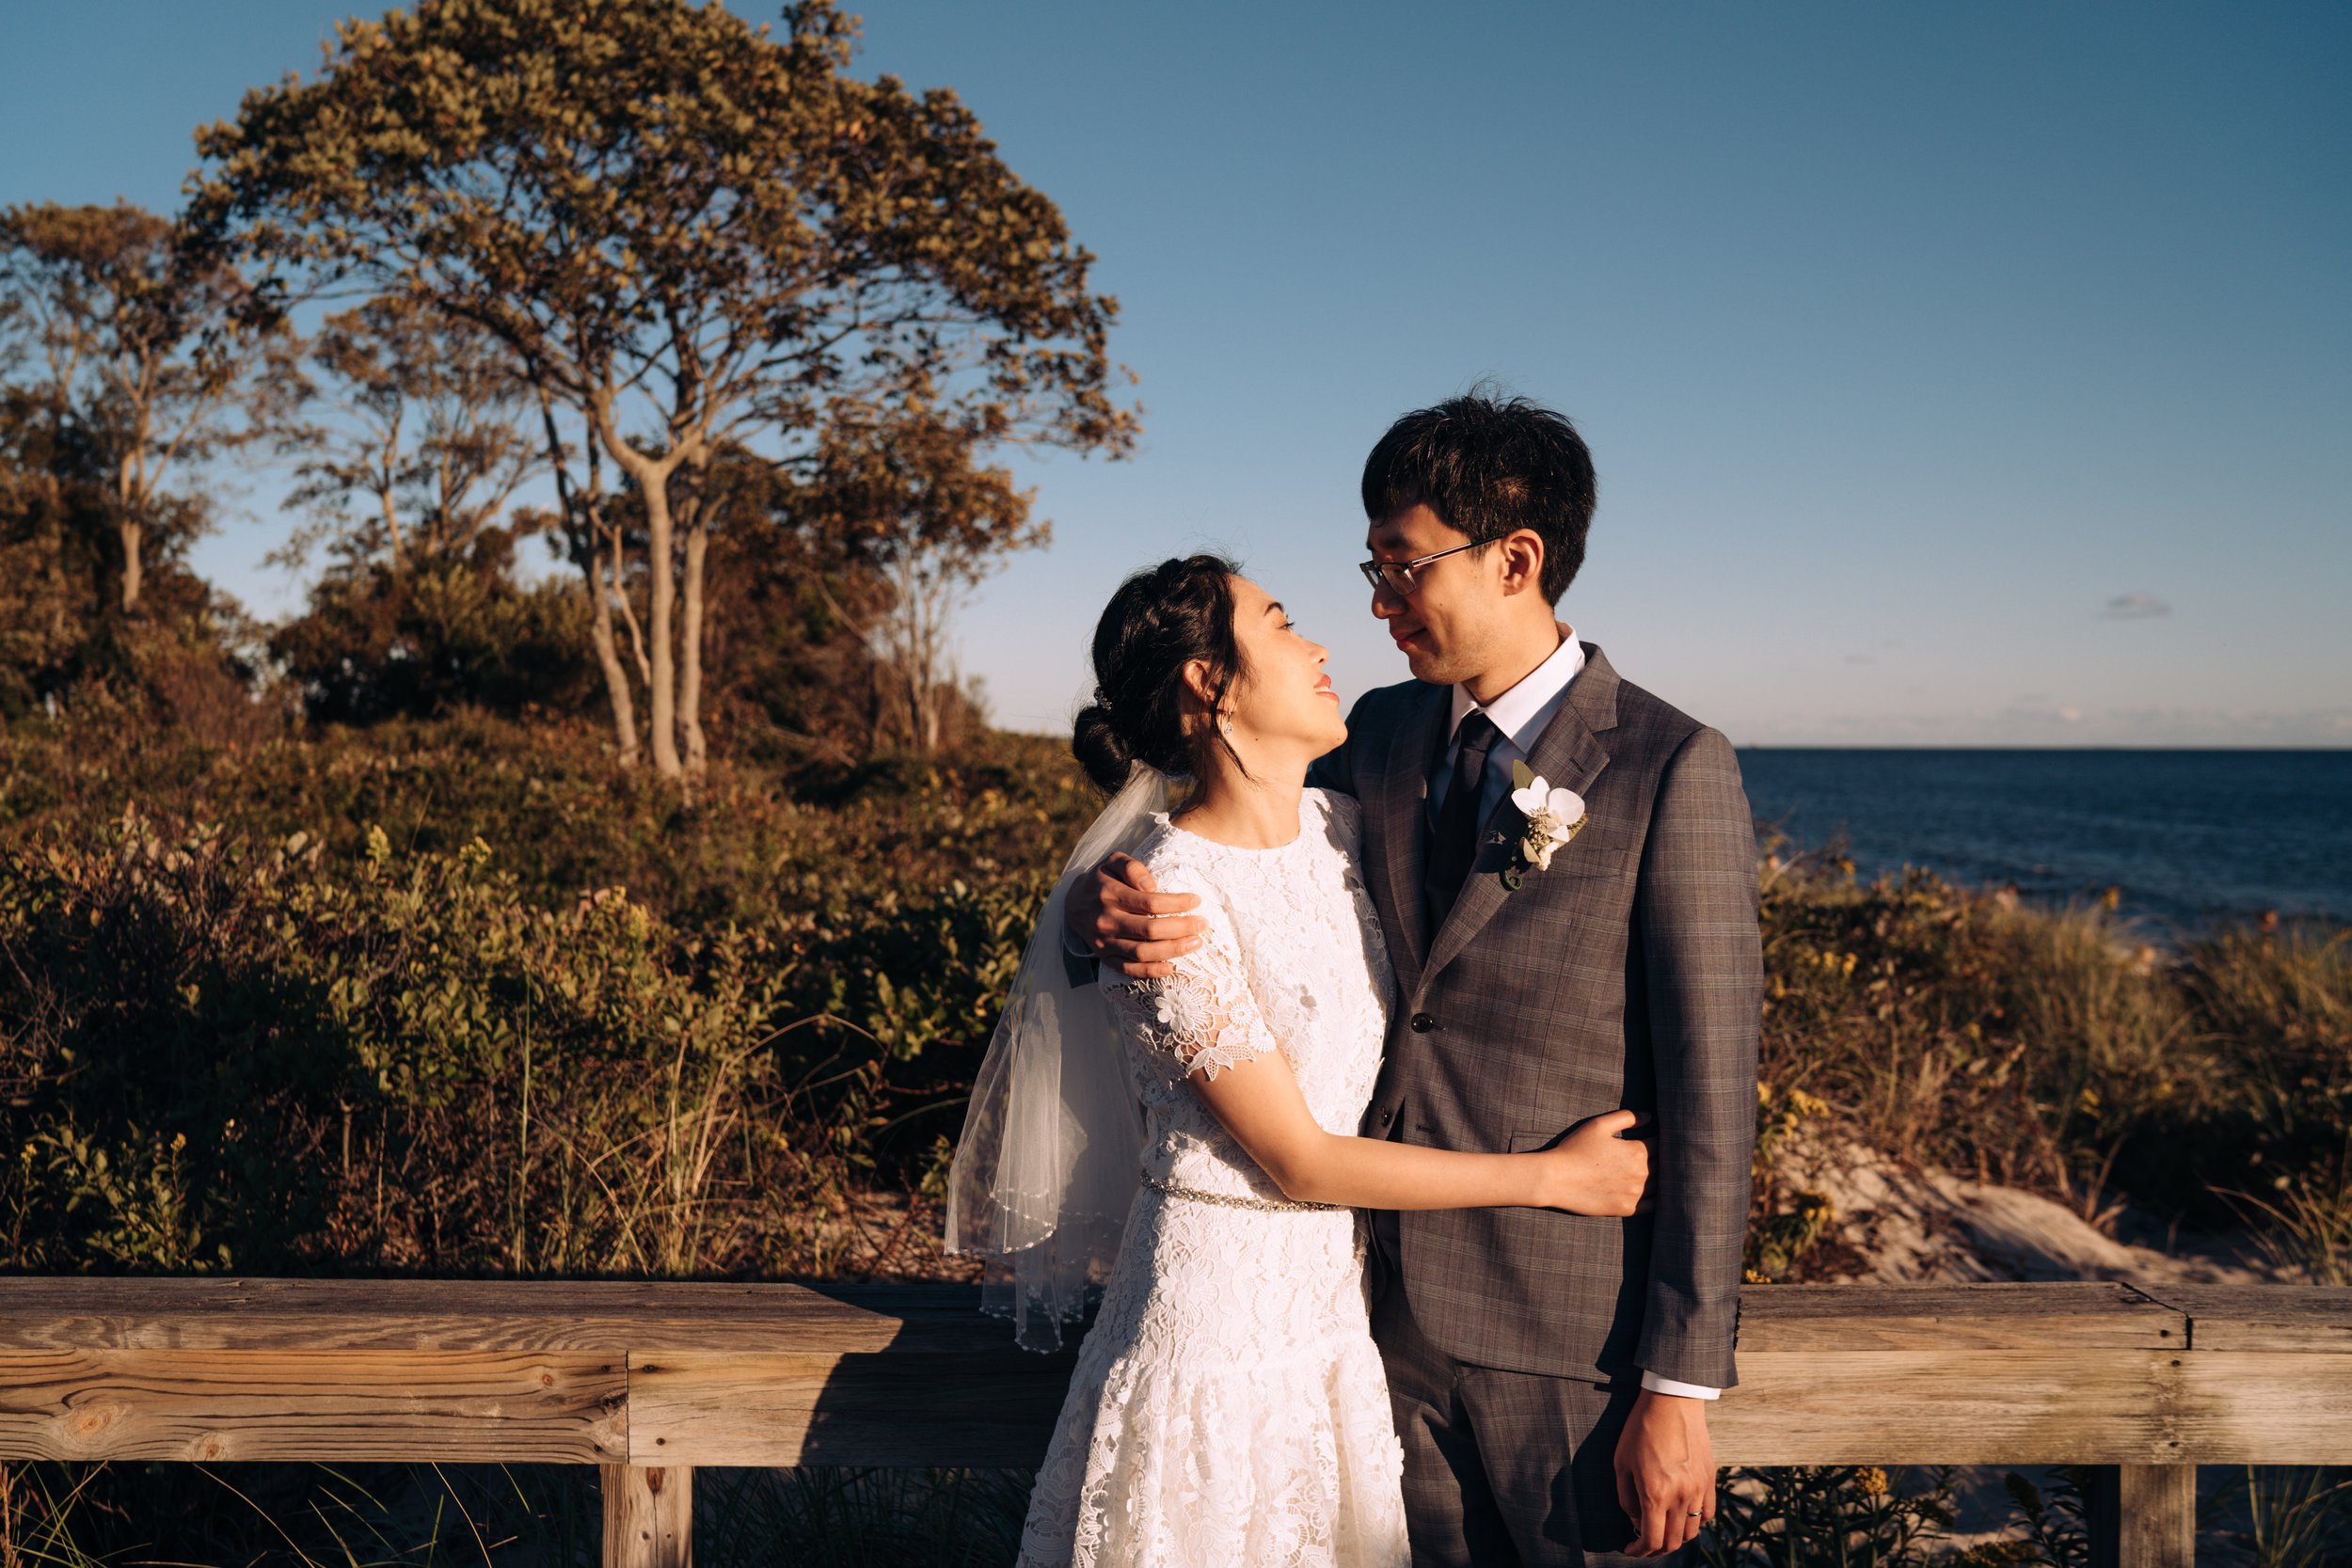 A Chinese couple, just married, stands side by side hugging and looking at each other against a blue sky and trees. The woman is wearing a short white dress and veil. The man is wearing a dark gray suit.